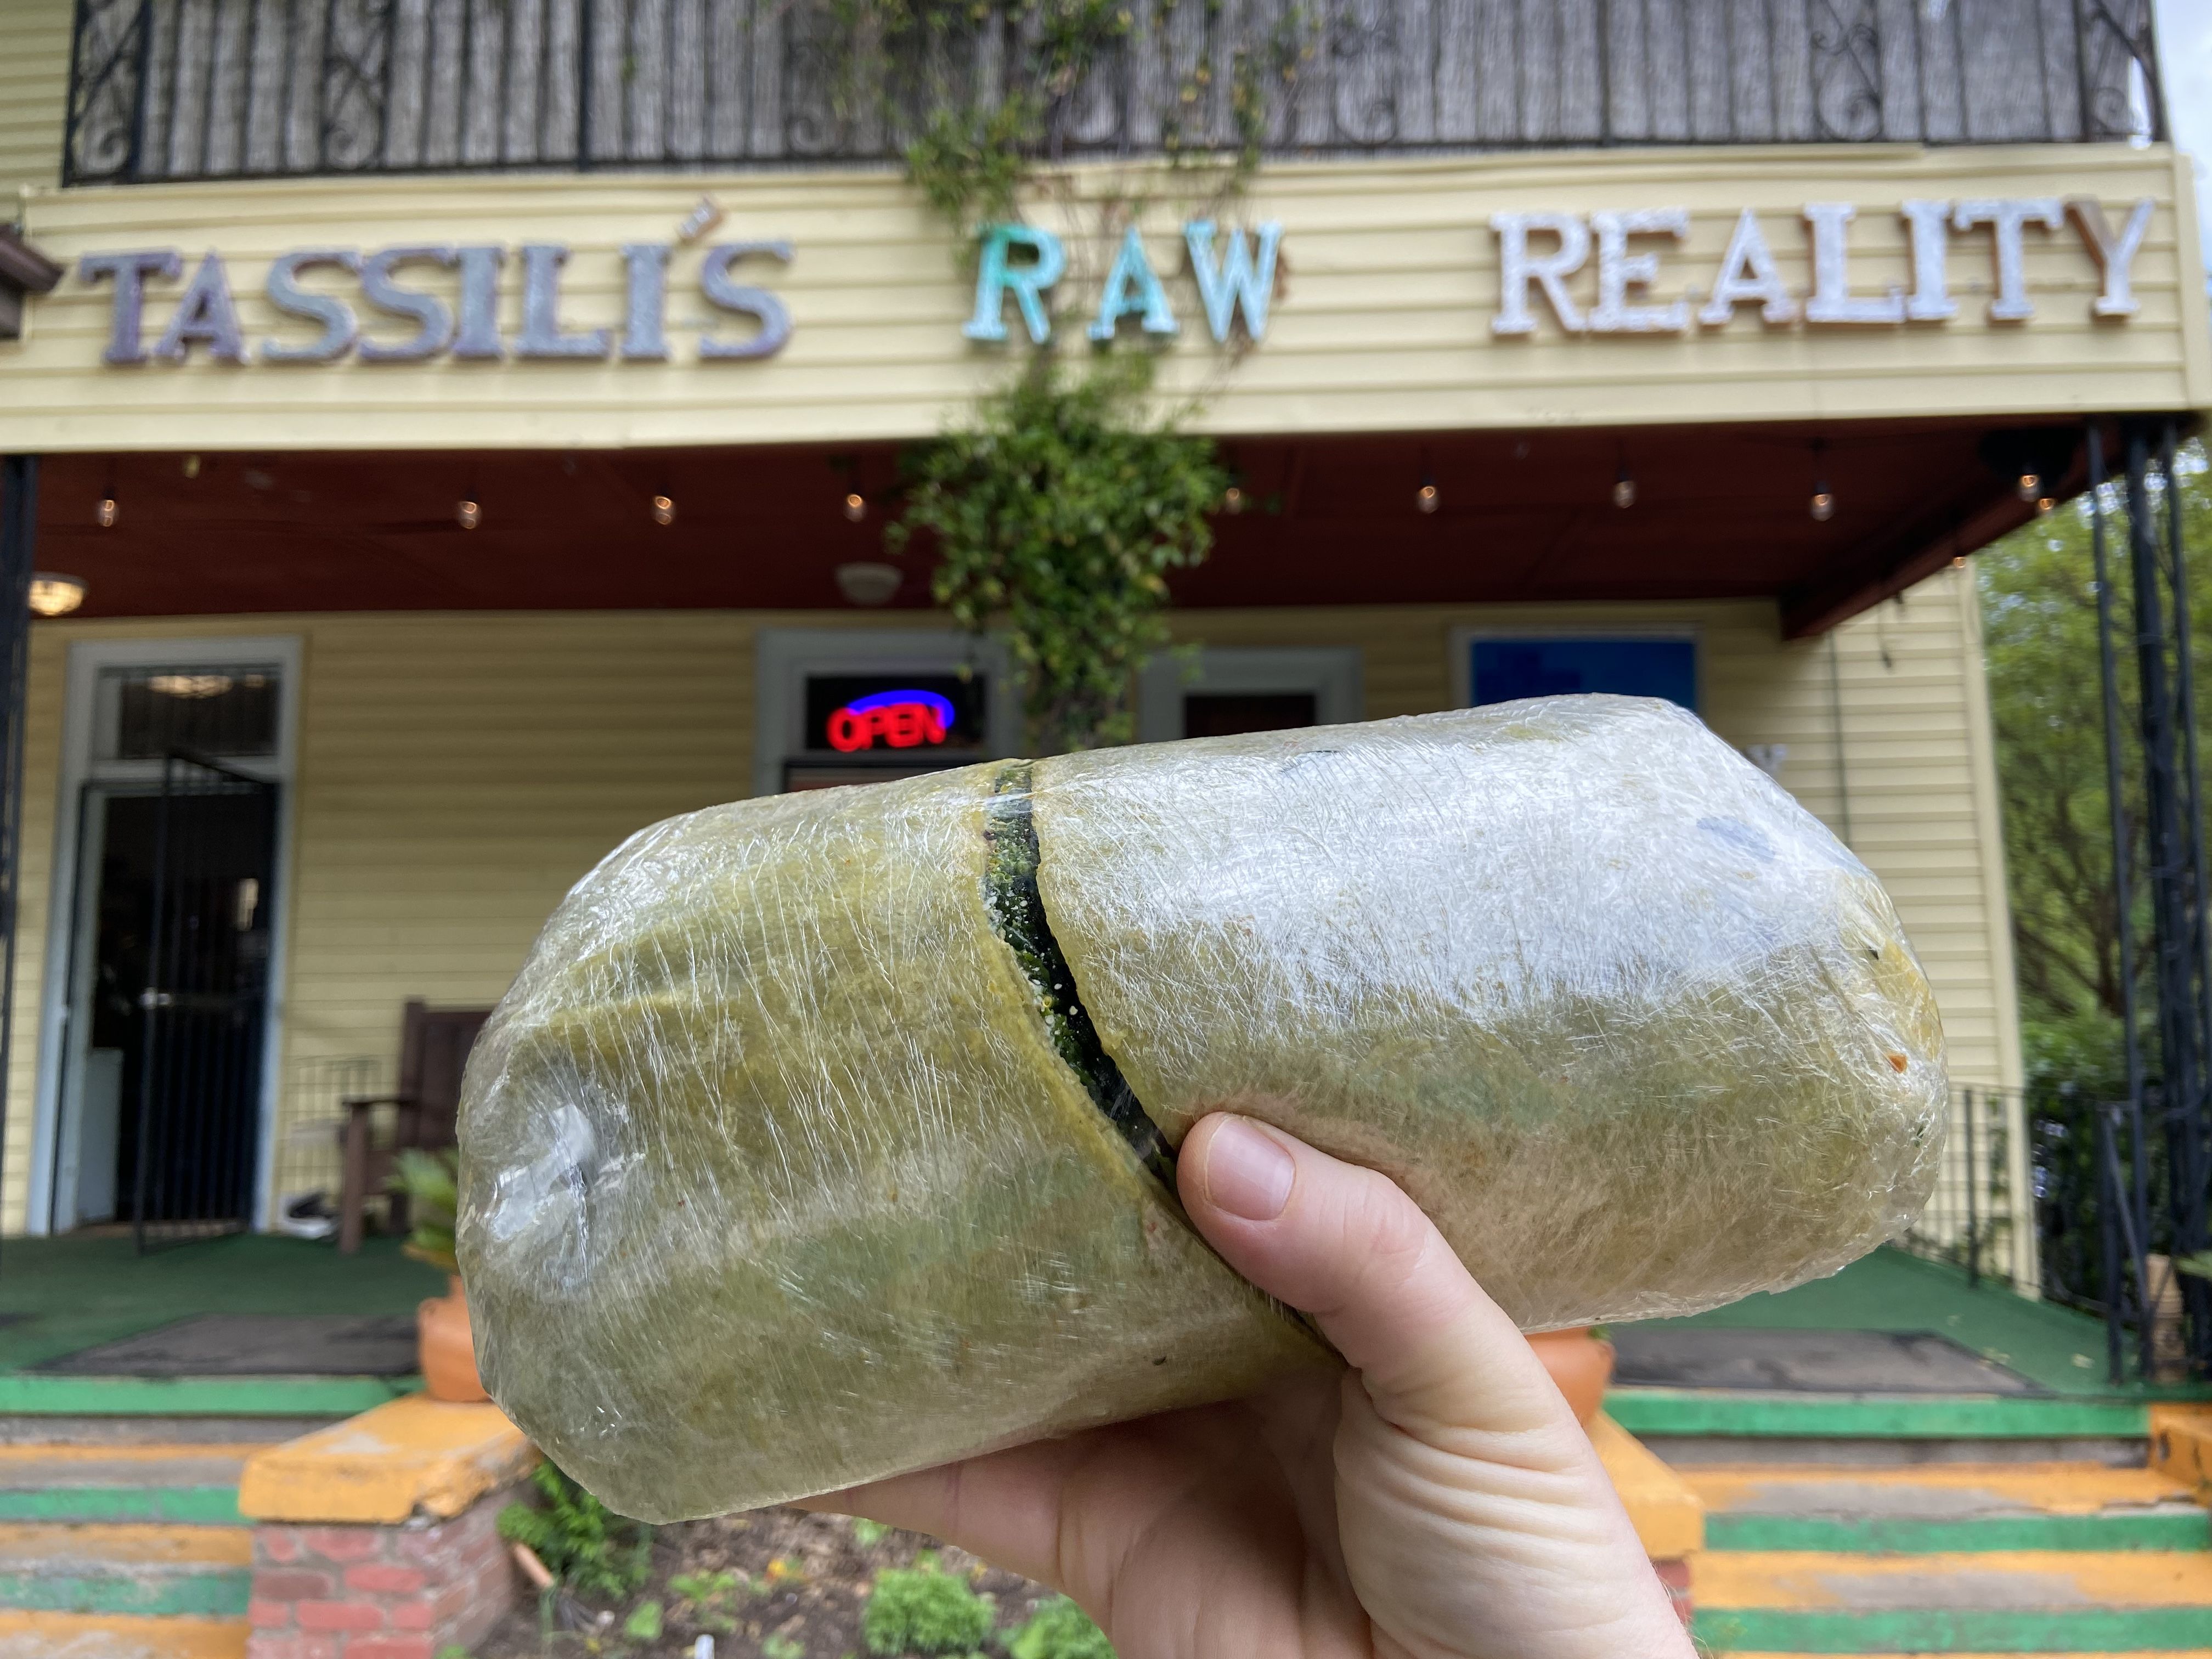 A hand holds a massive spinach wrap filled with raw food in front of Tassili’s Raw Reality